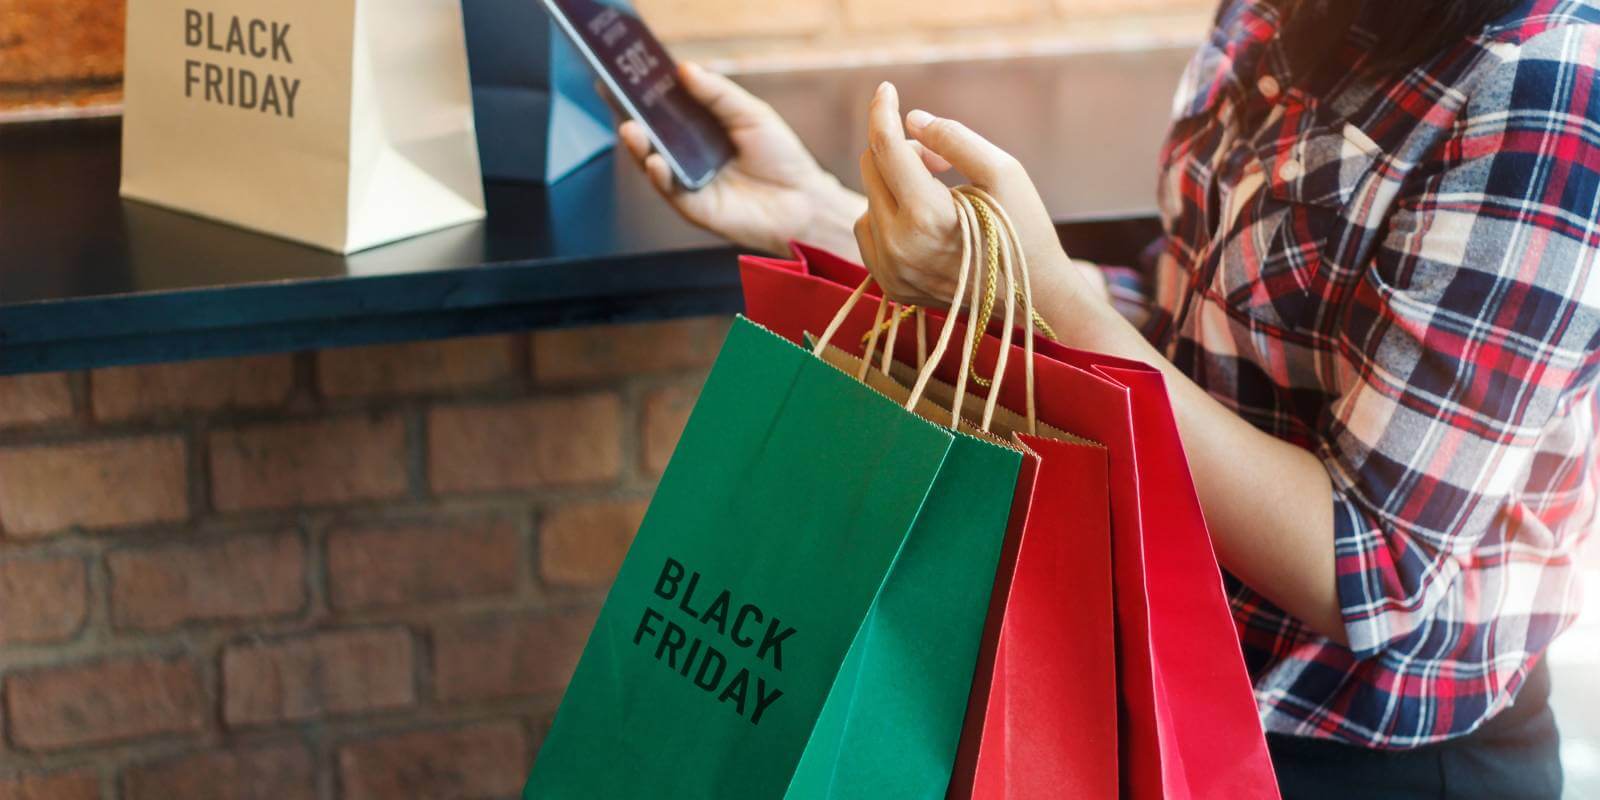 2019 Black Friday Tech Deals You Can’t Miss - Nixplay blog